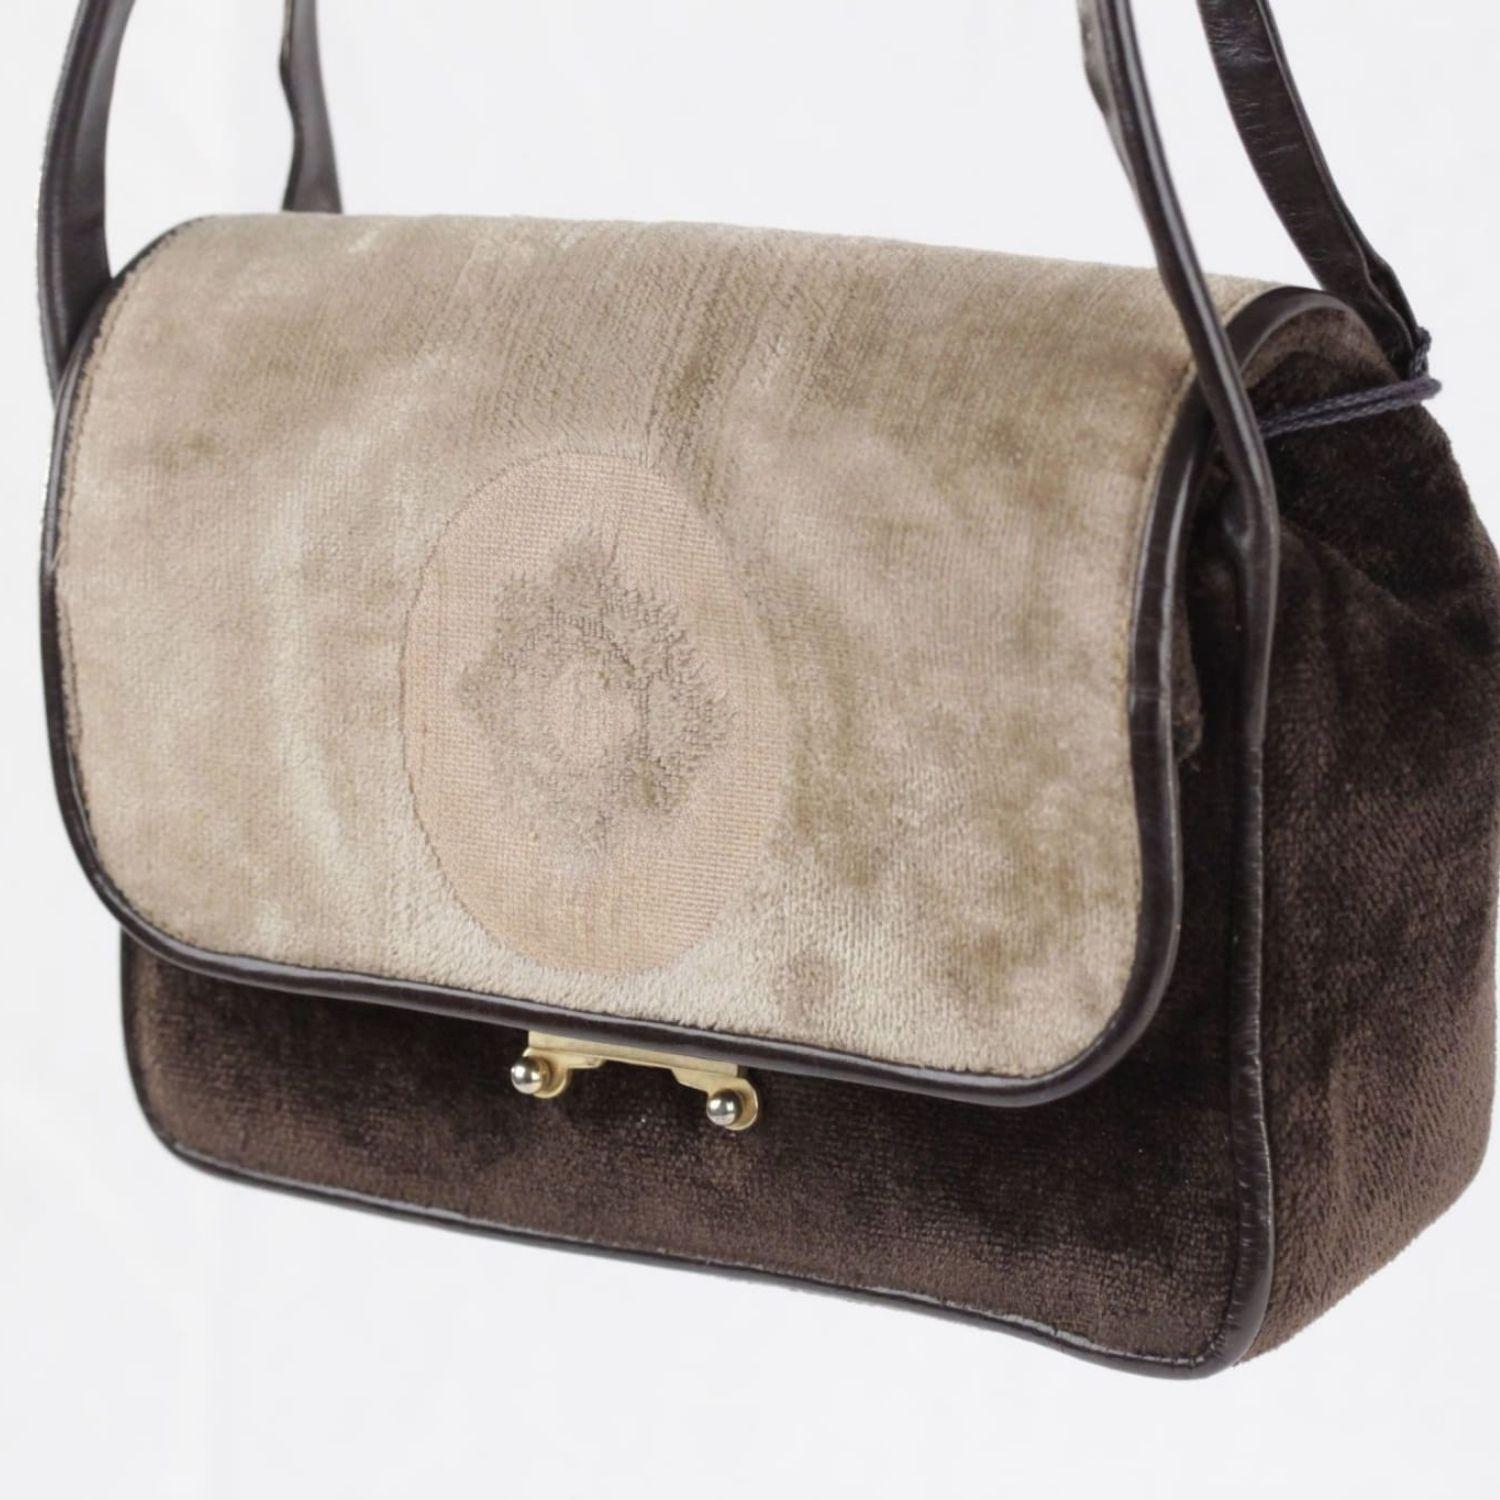 - ROBERTA DI CAMERINO - Made in Italy. 'Made in Italy by ROBERTA DI CAMERINO' embossed inside. Flap with clasp closure. Brown leather internal lining., 2 side open pockets inside. Details MATERIAL: Velvet COLOR: Brown MODEL: - GENDER: Women COUNTRY